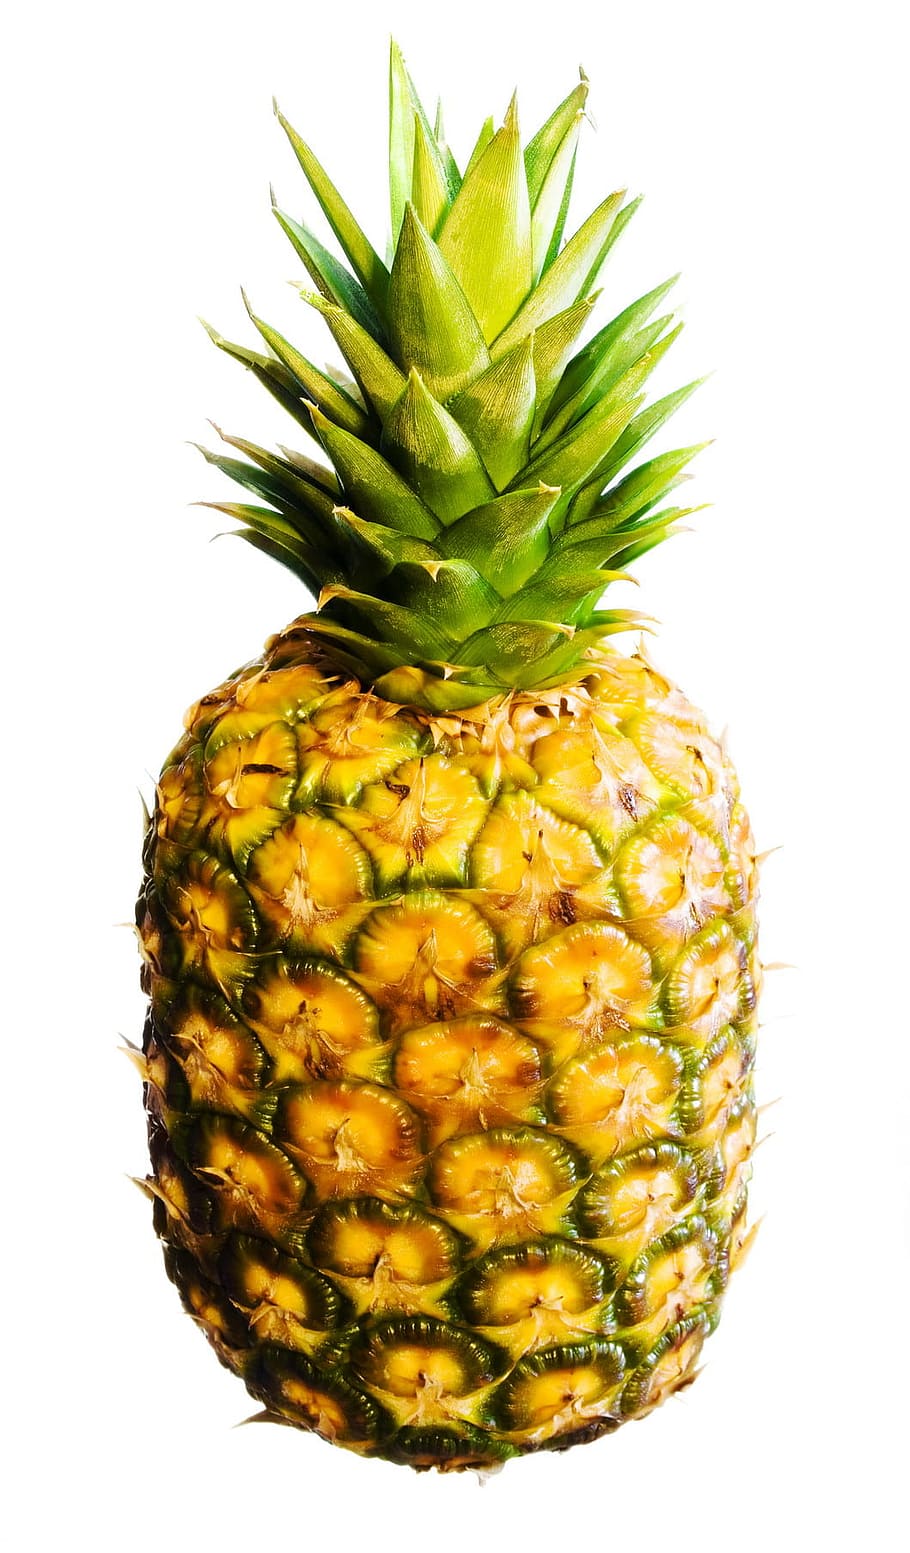 pineapple, isolated, ripe, single, object, nobody, green, white, sweet, food